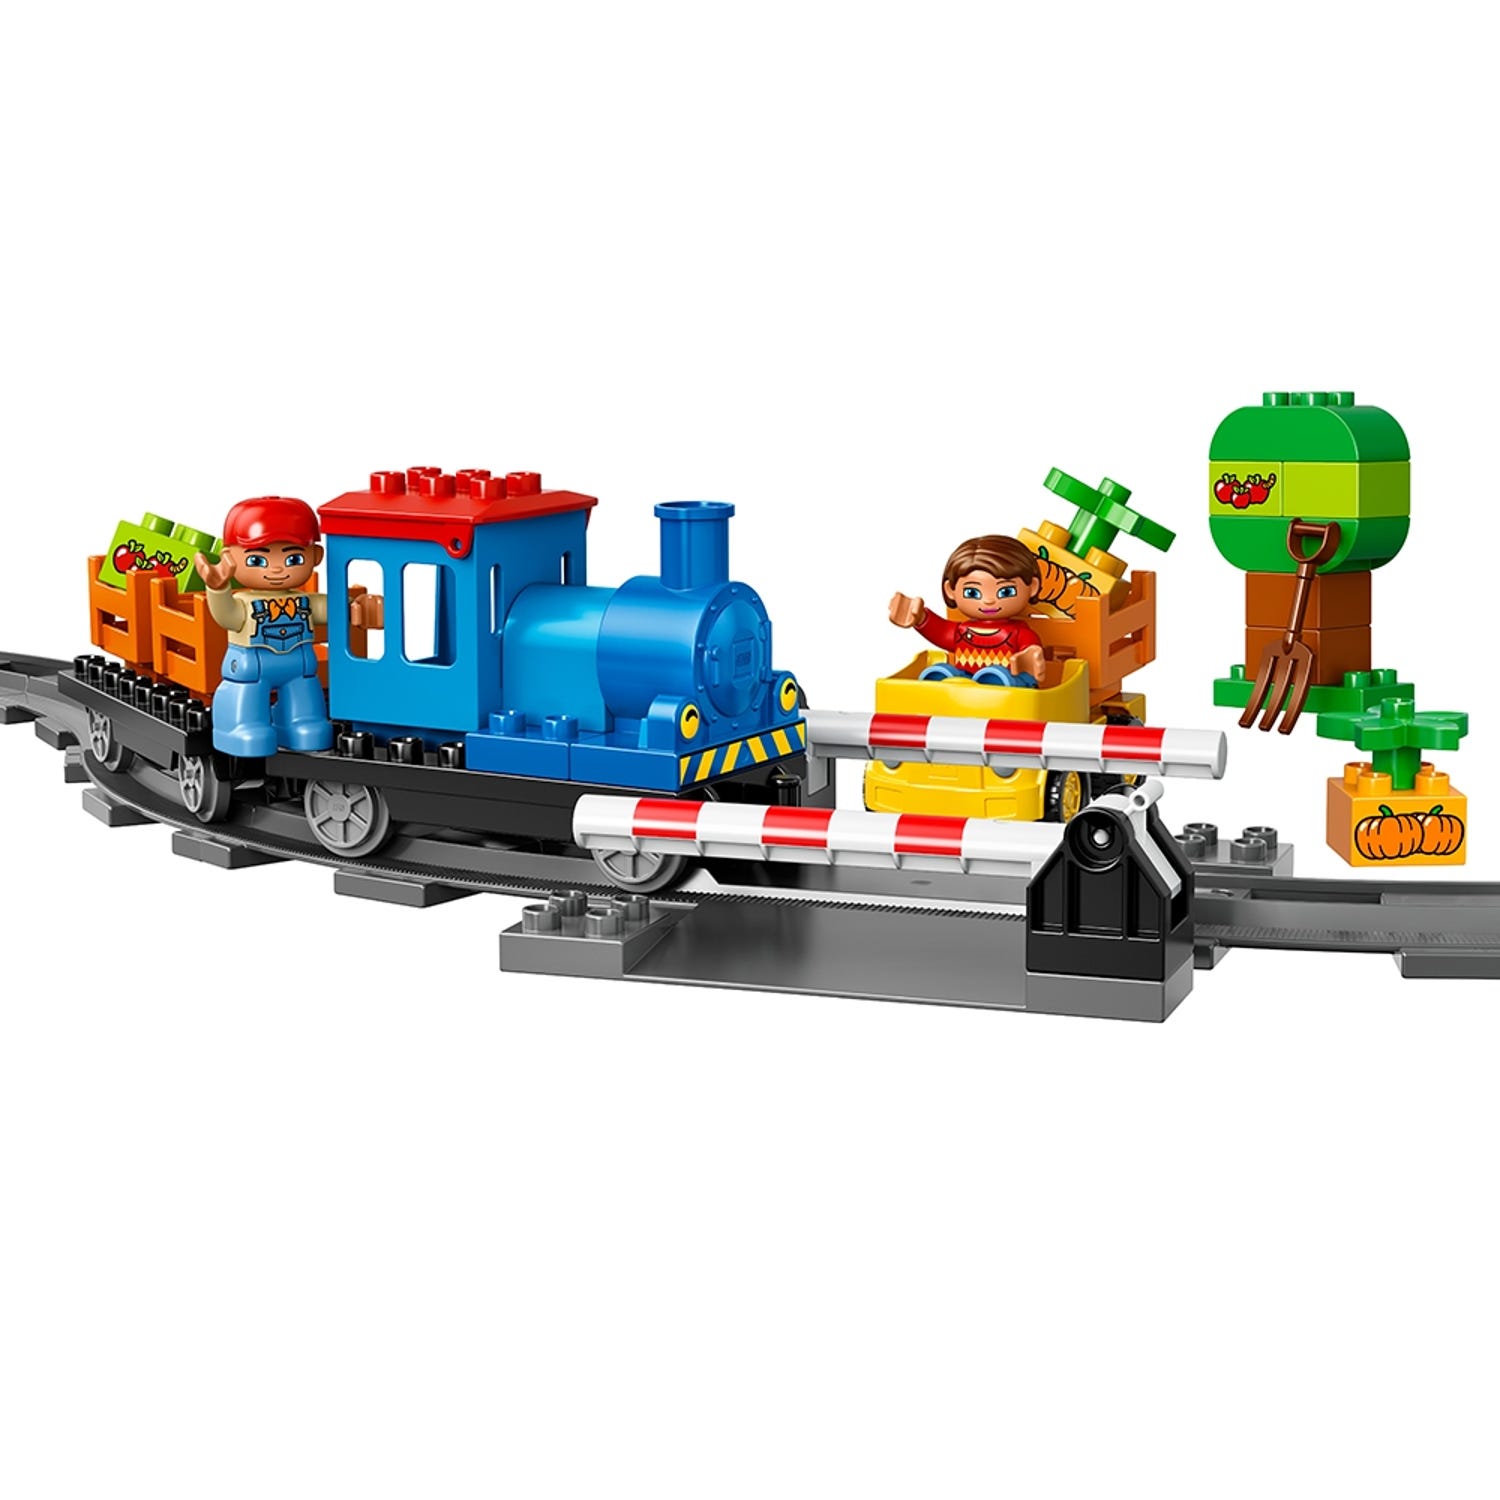 Push Train 10810 | DUPLO® | Buy online at the Official LEGO® Shop US